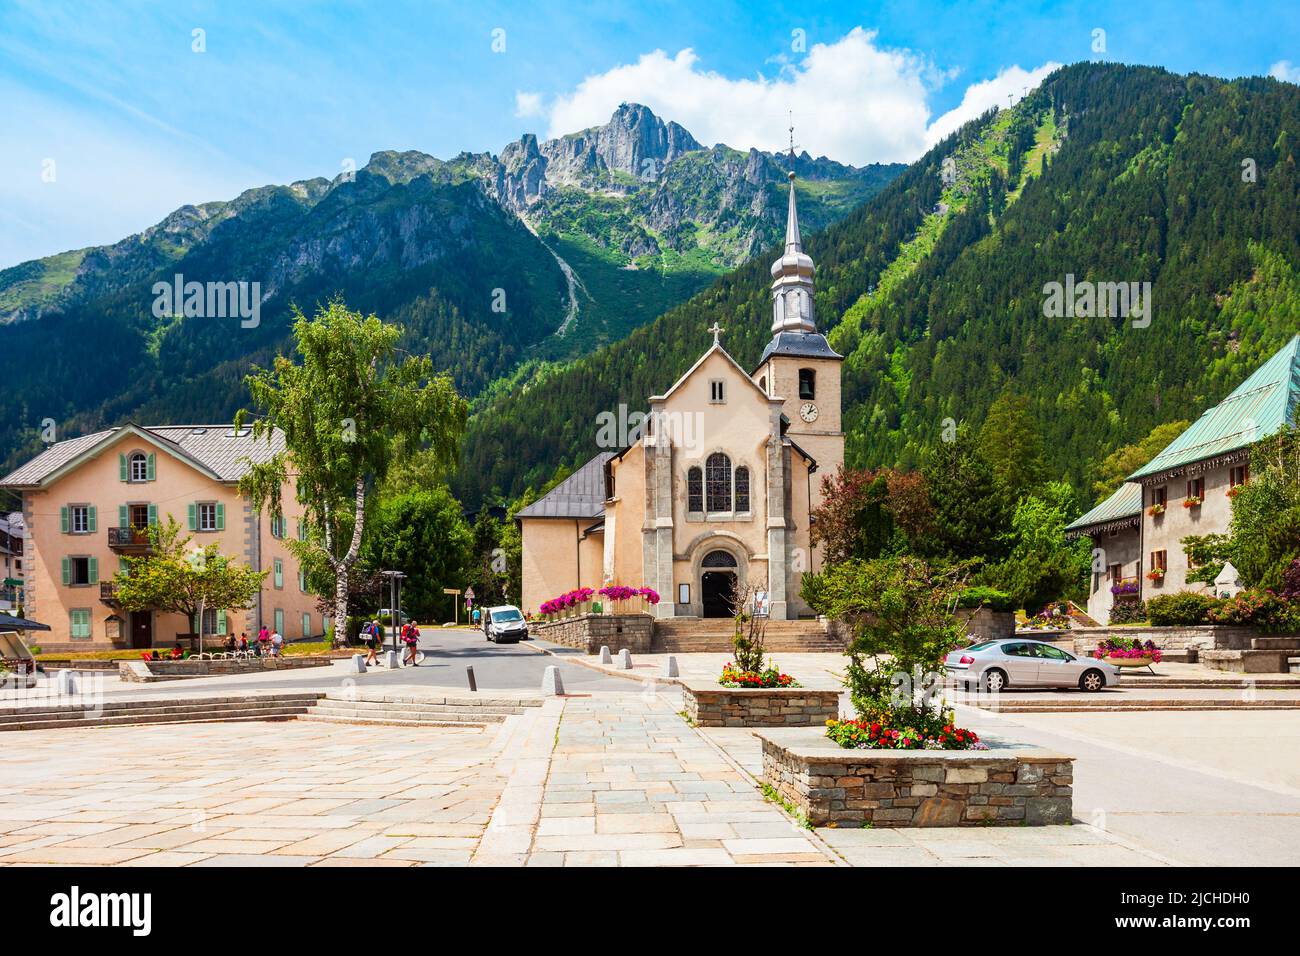 Saint Michel or St. Michael Catholic Church in the Chamonix Mont Blanc town in France Stock Photo